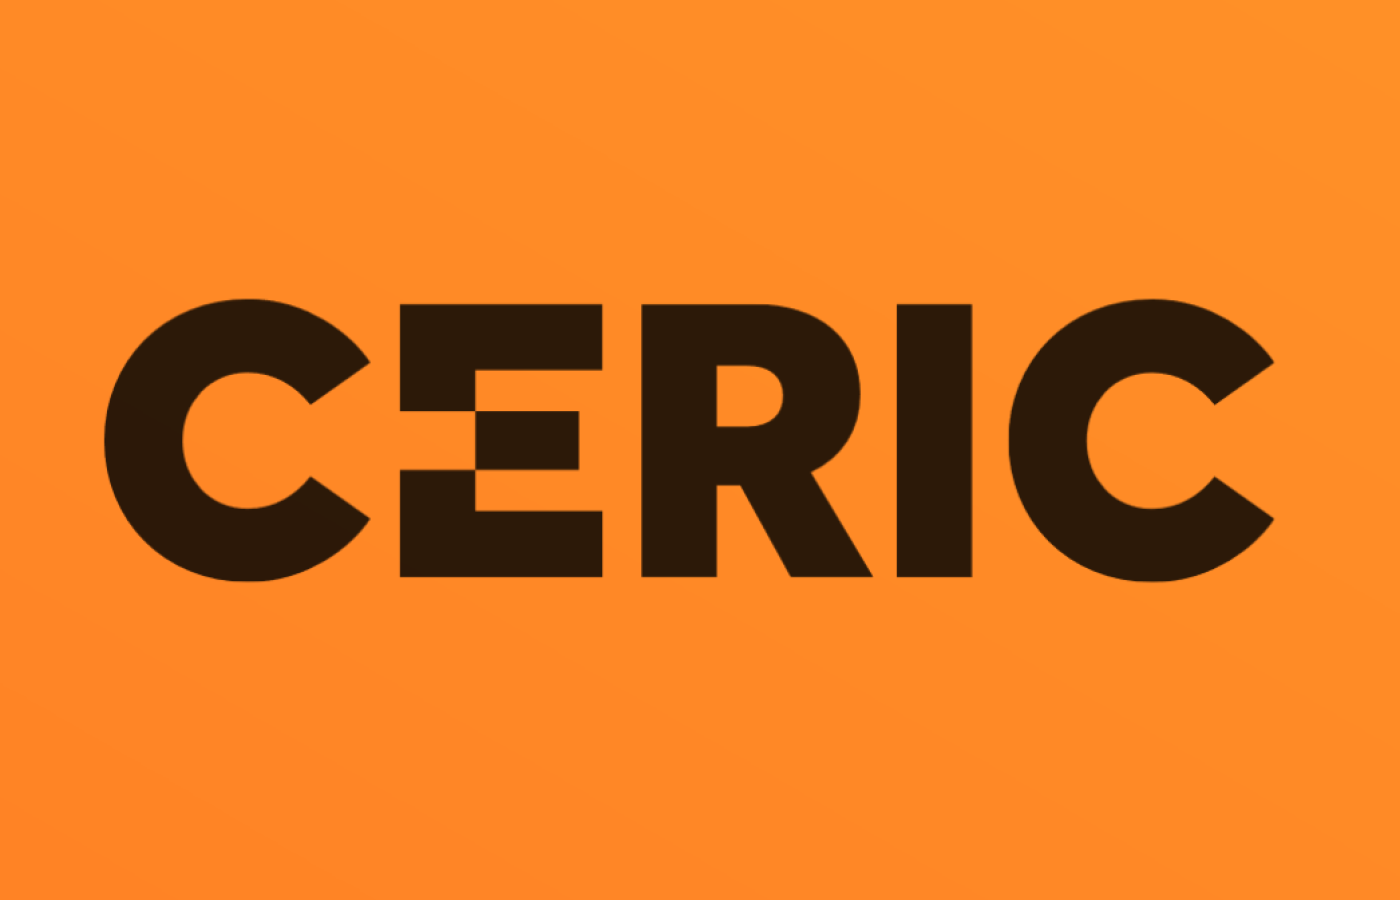 The annual 2020 report of the CERIC has been published